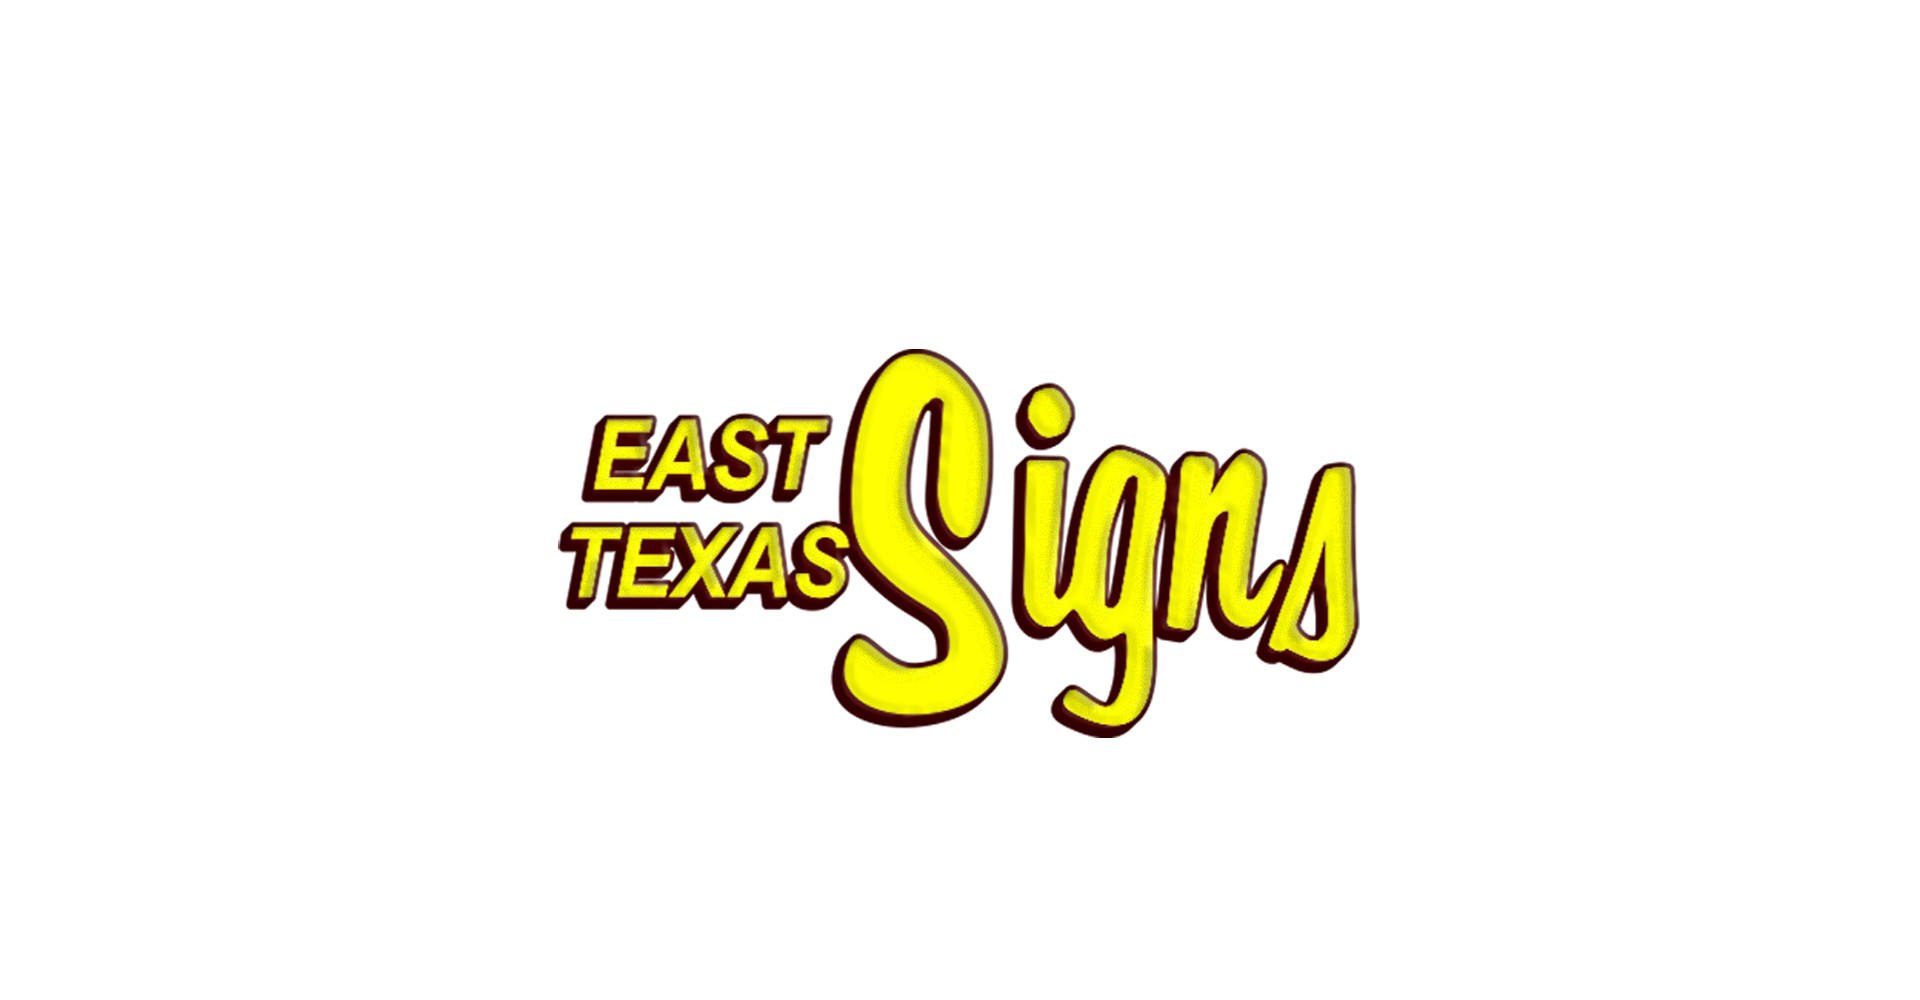 East Texas Signs